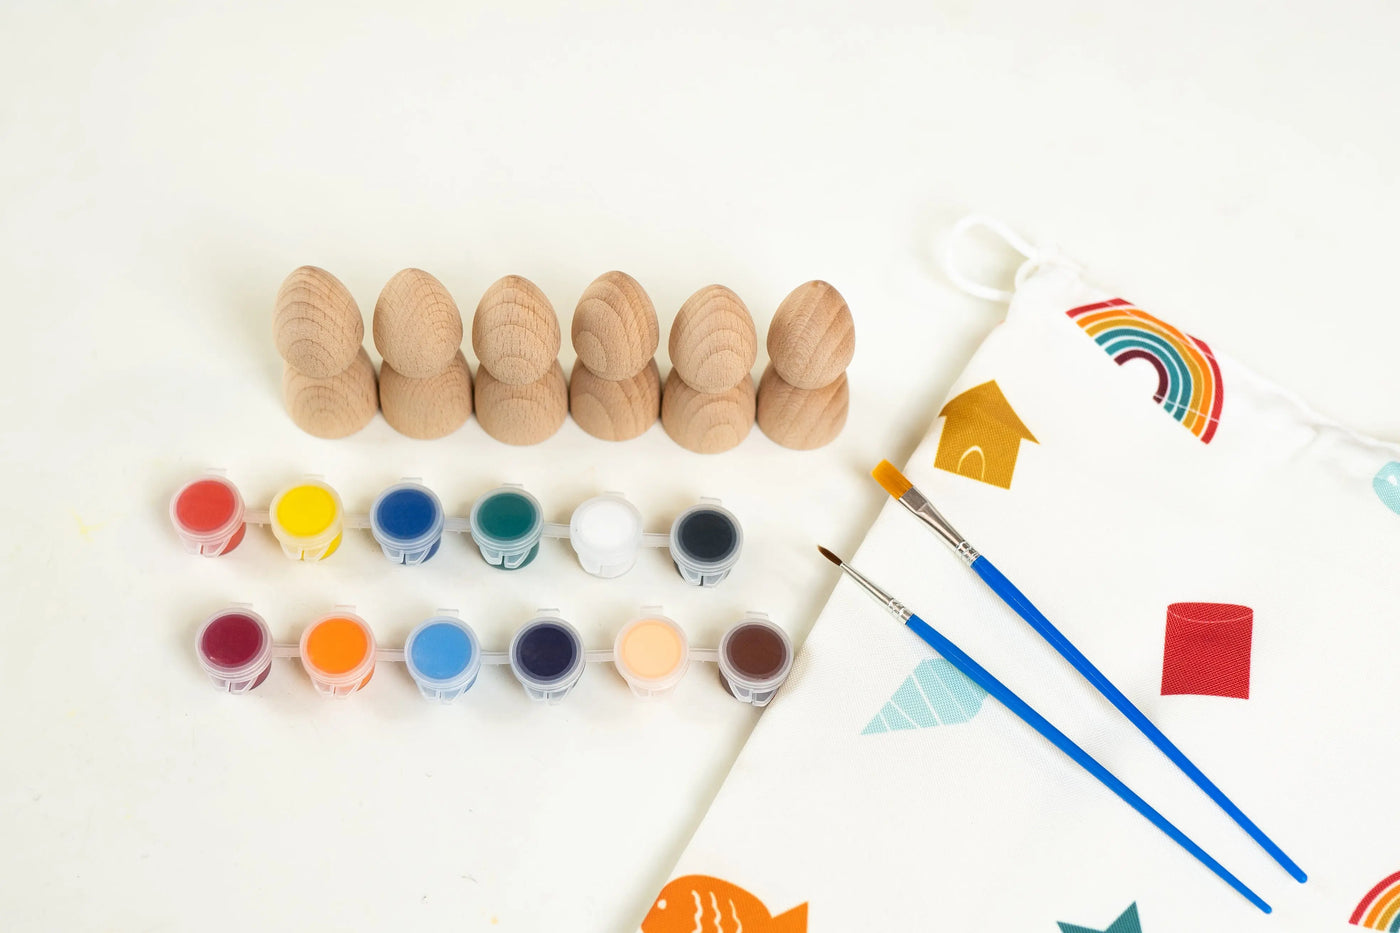 DIY Wooden Nins paint your own with storage bag